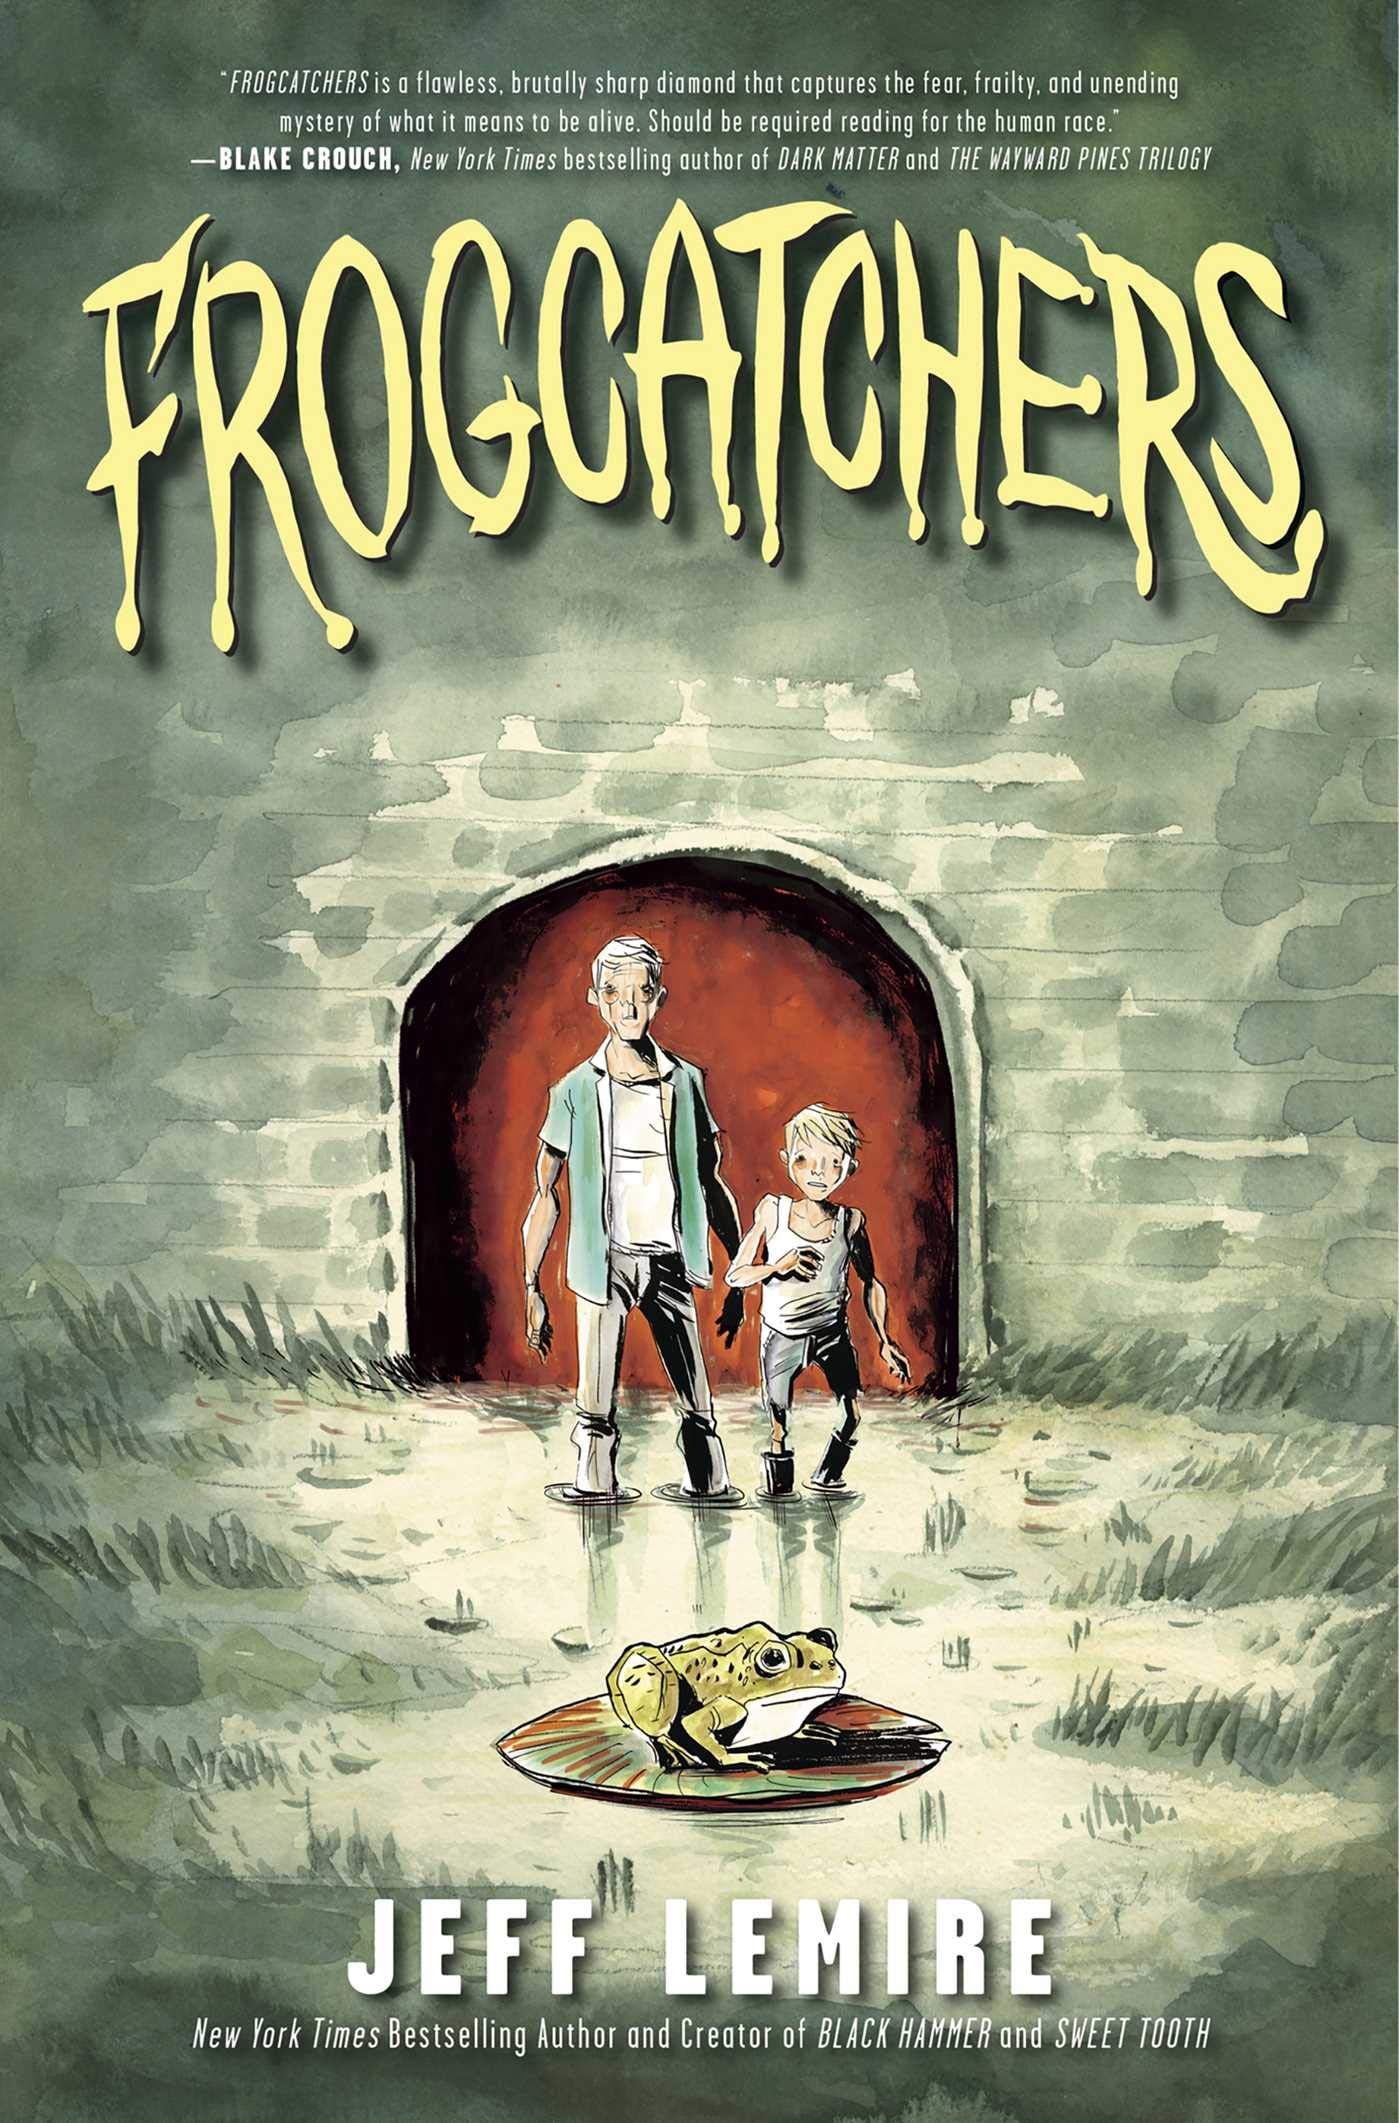 Graphic Novels for Fall 2019: Frogcatchers